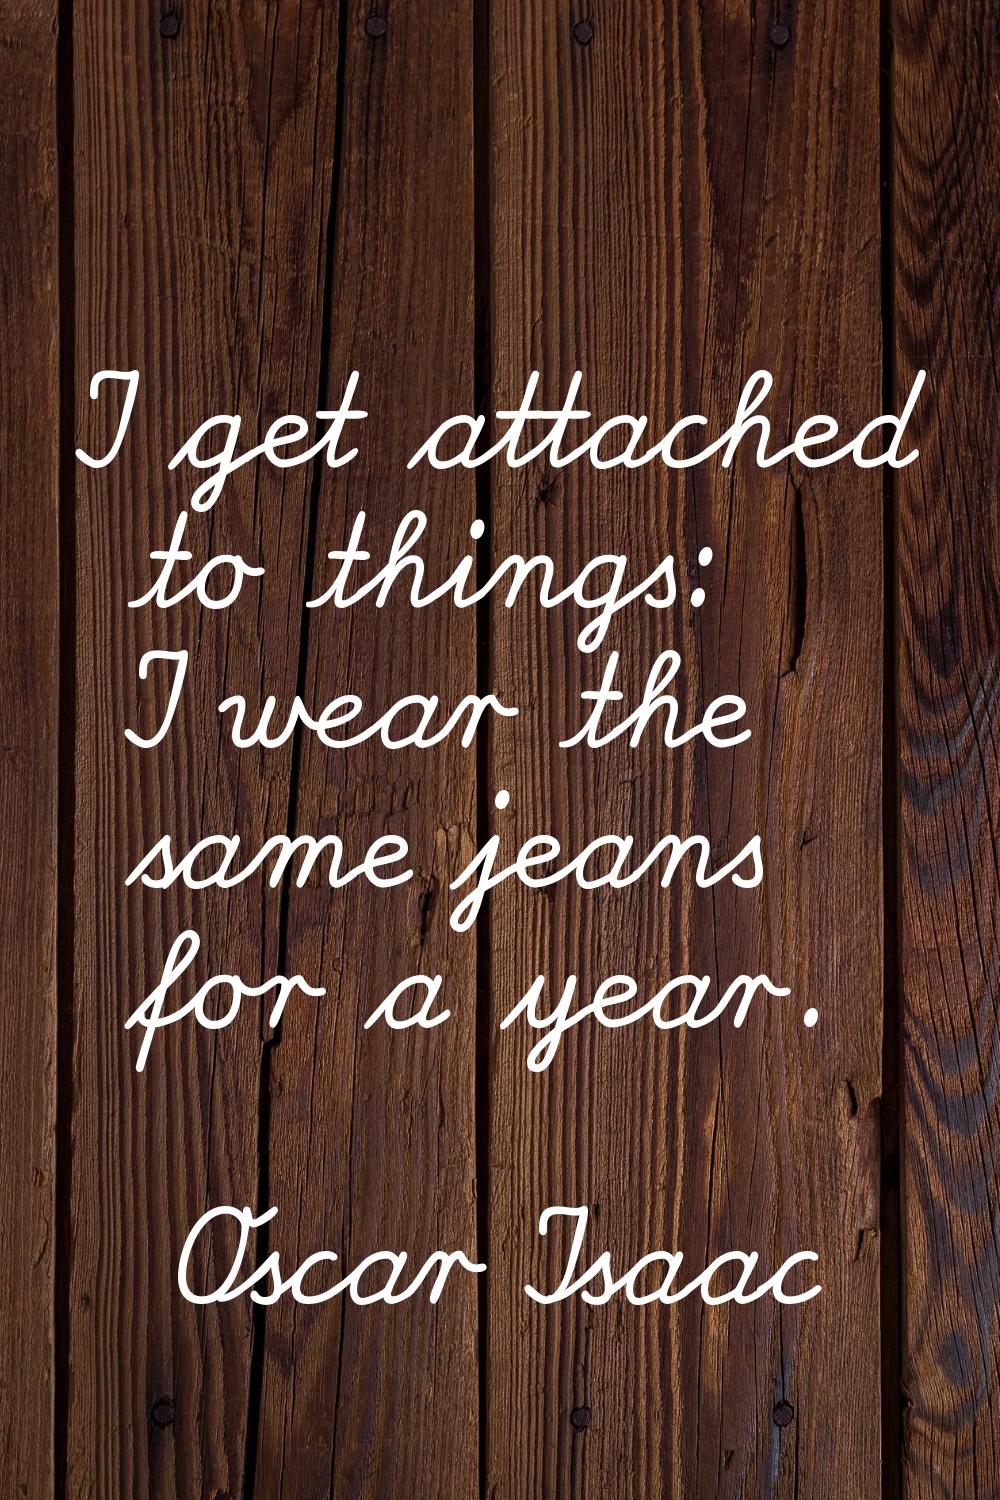 I get attached to things: I wear the same jeans for a year.